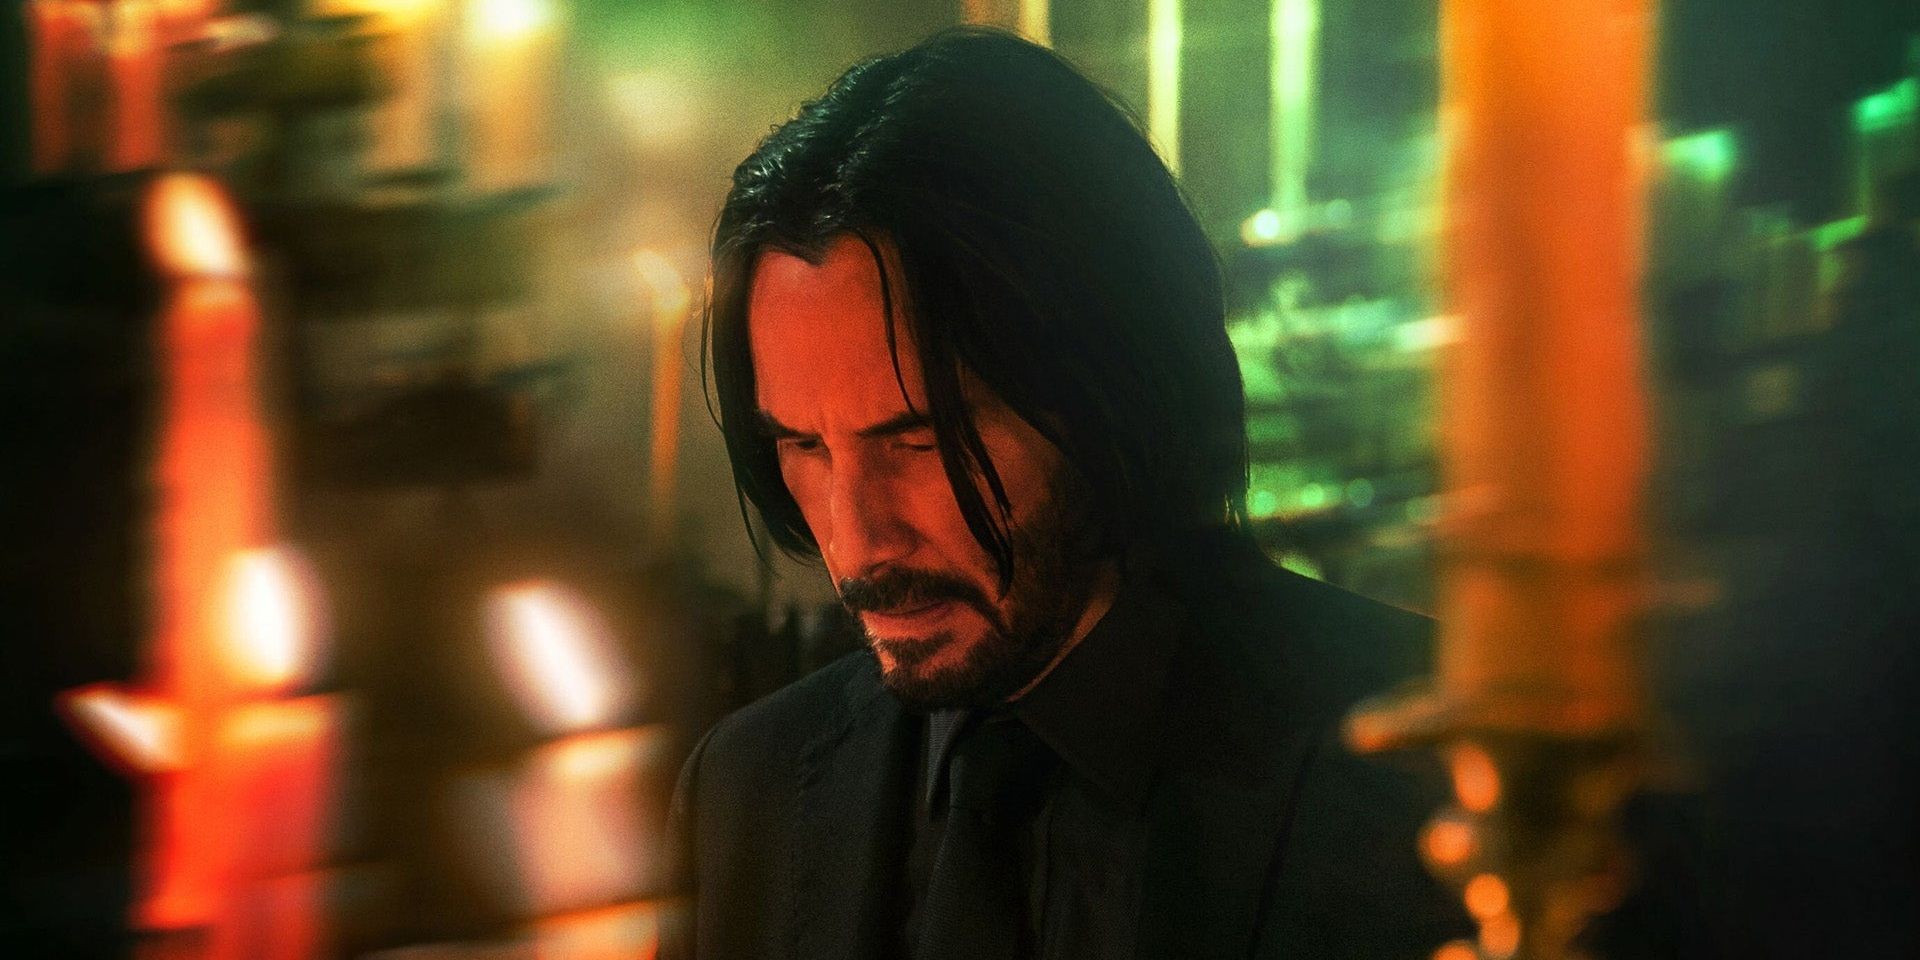 The first official image from John Wick Chapter 4 with Keanu Reeves looking down